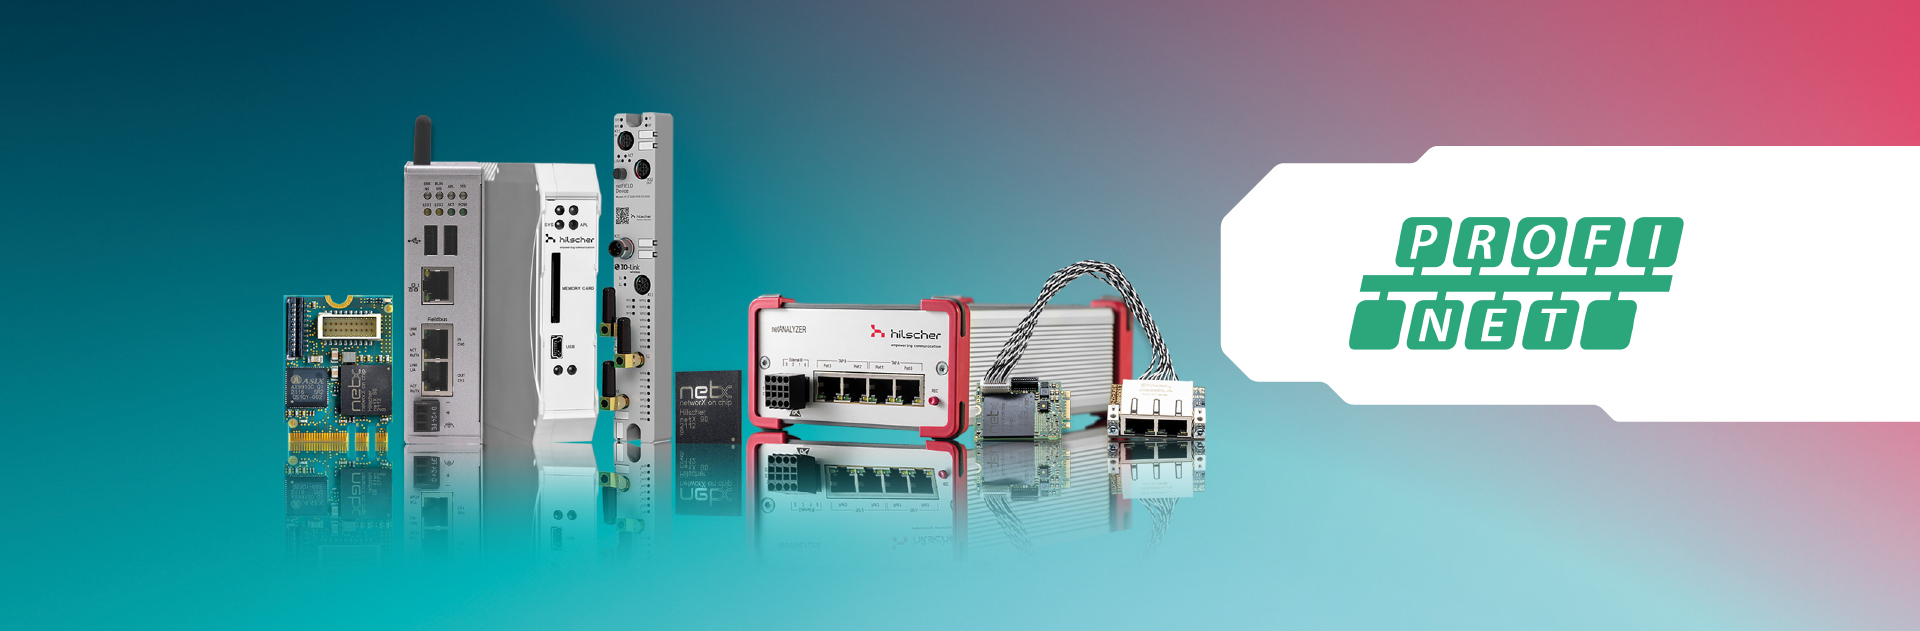 A line of 8 industrial communication products by Hilscher on a blue and red background. On a white area on the right side, there is a PROFINET logo in green.